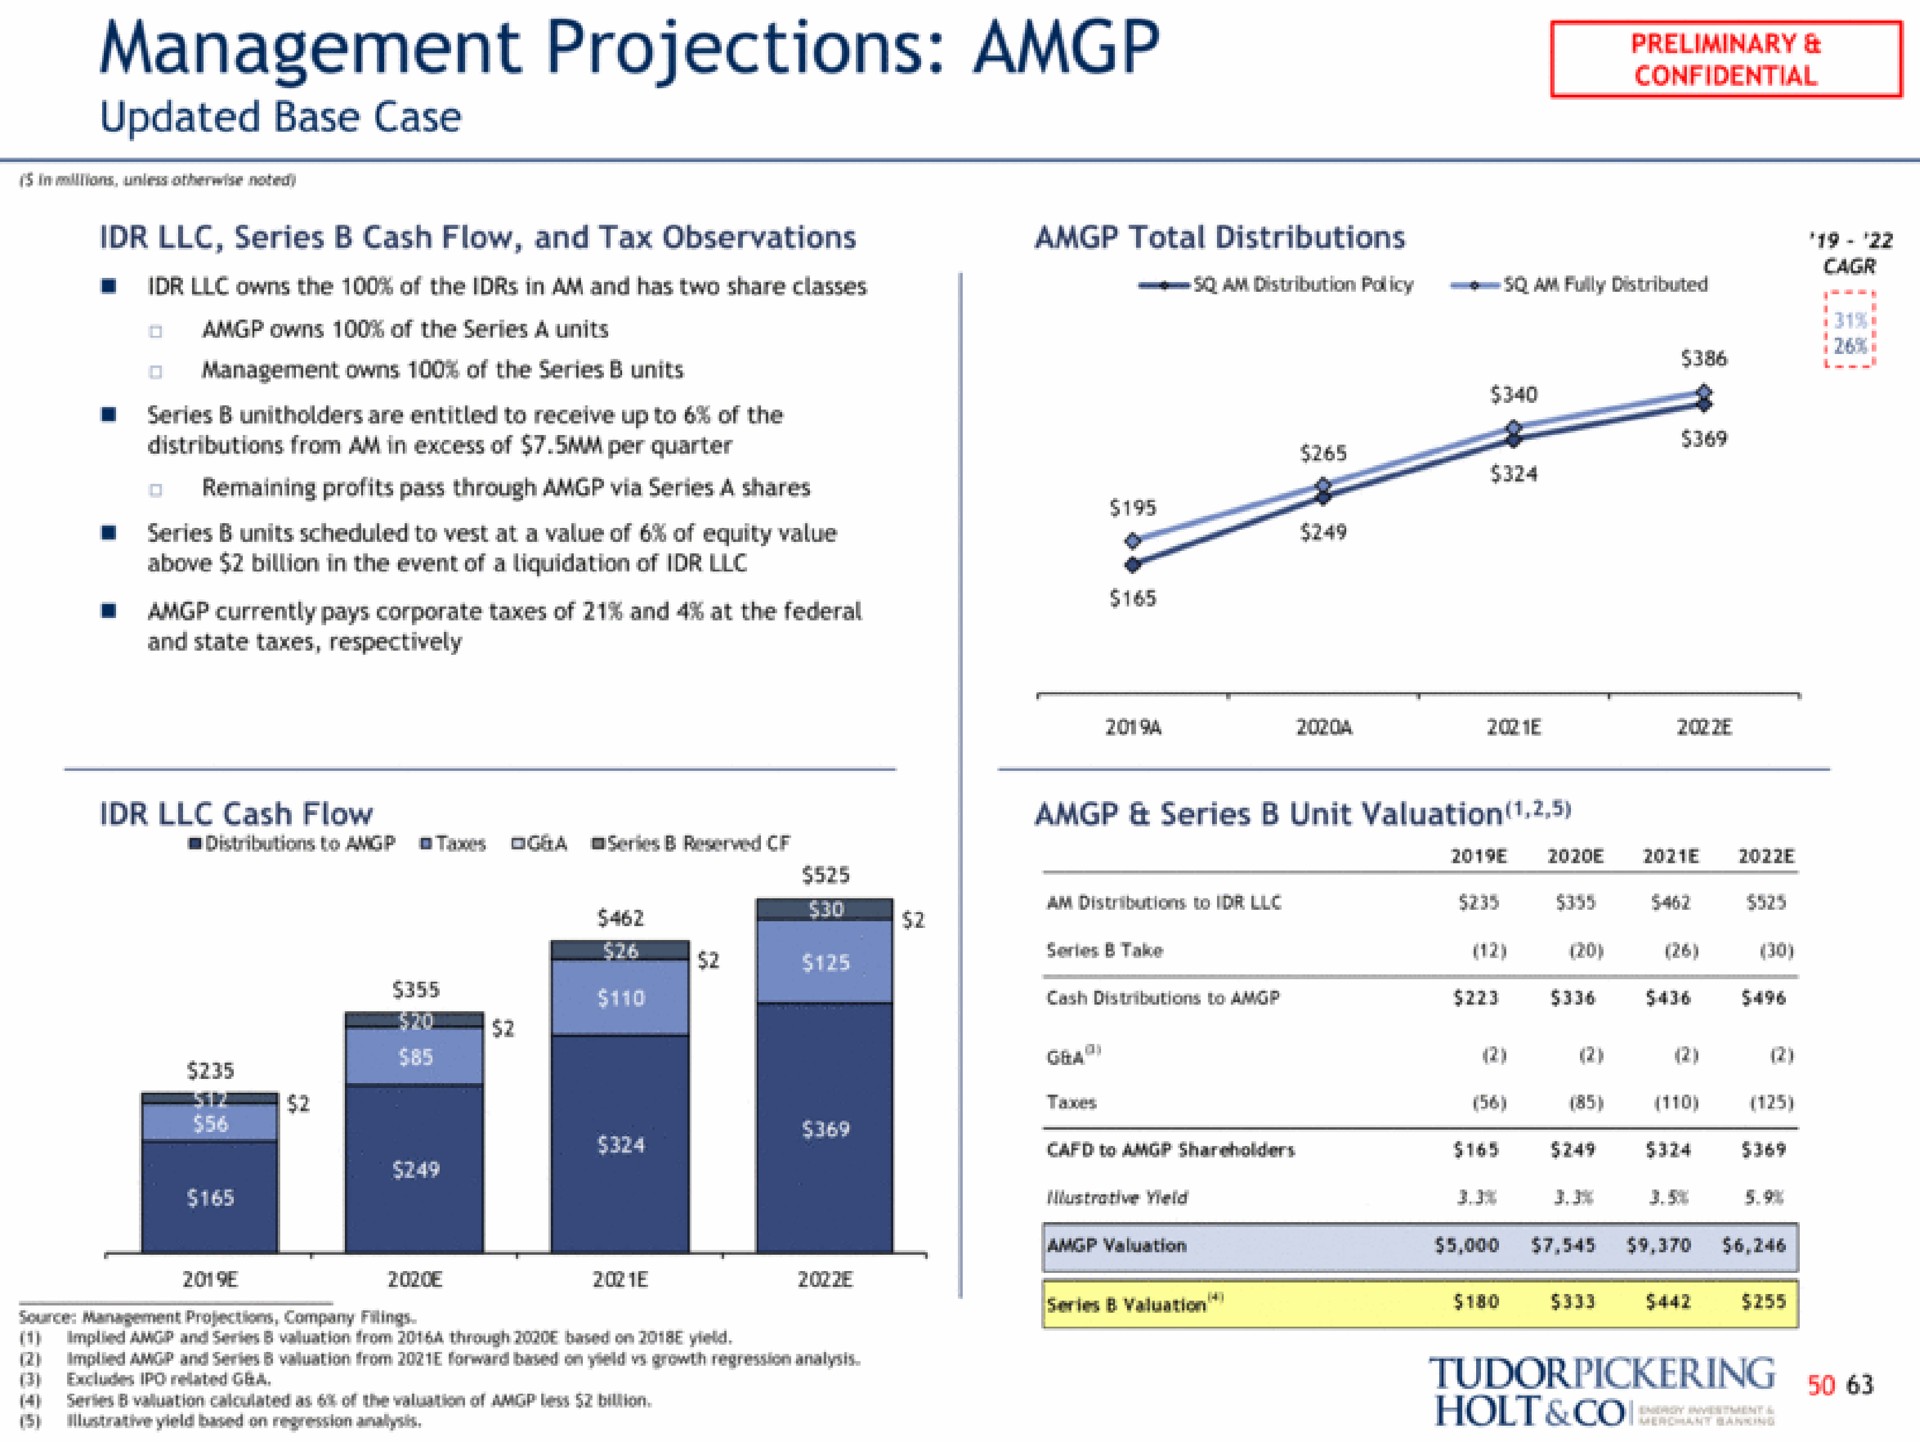 management projections updated base case preliminary confidential holt | Tudor, Pickering, Holt & Co